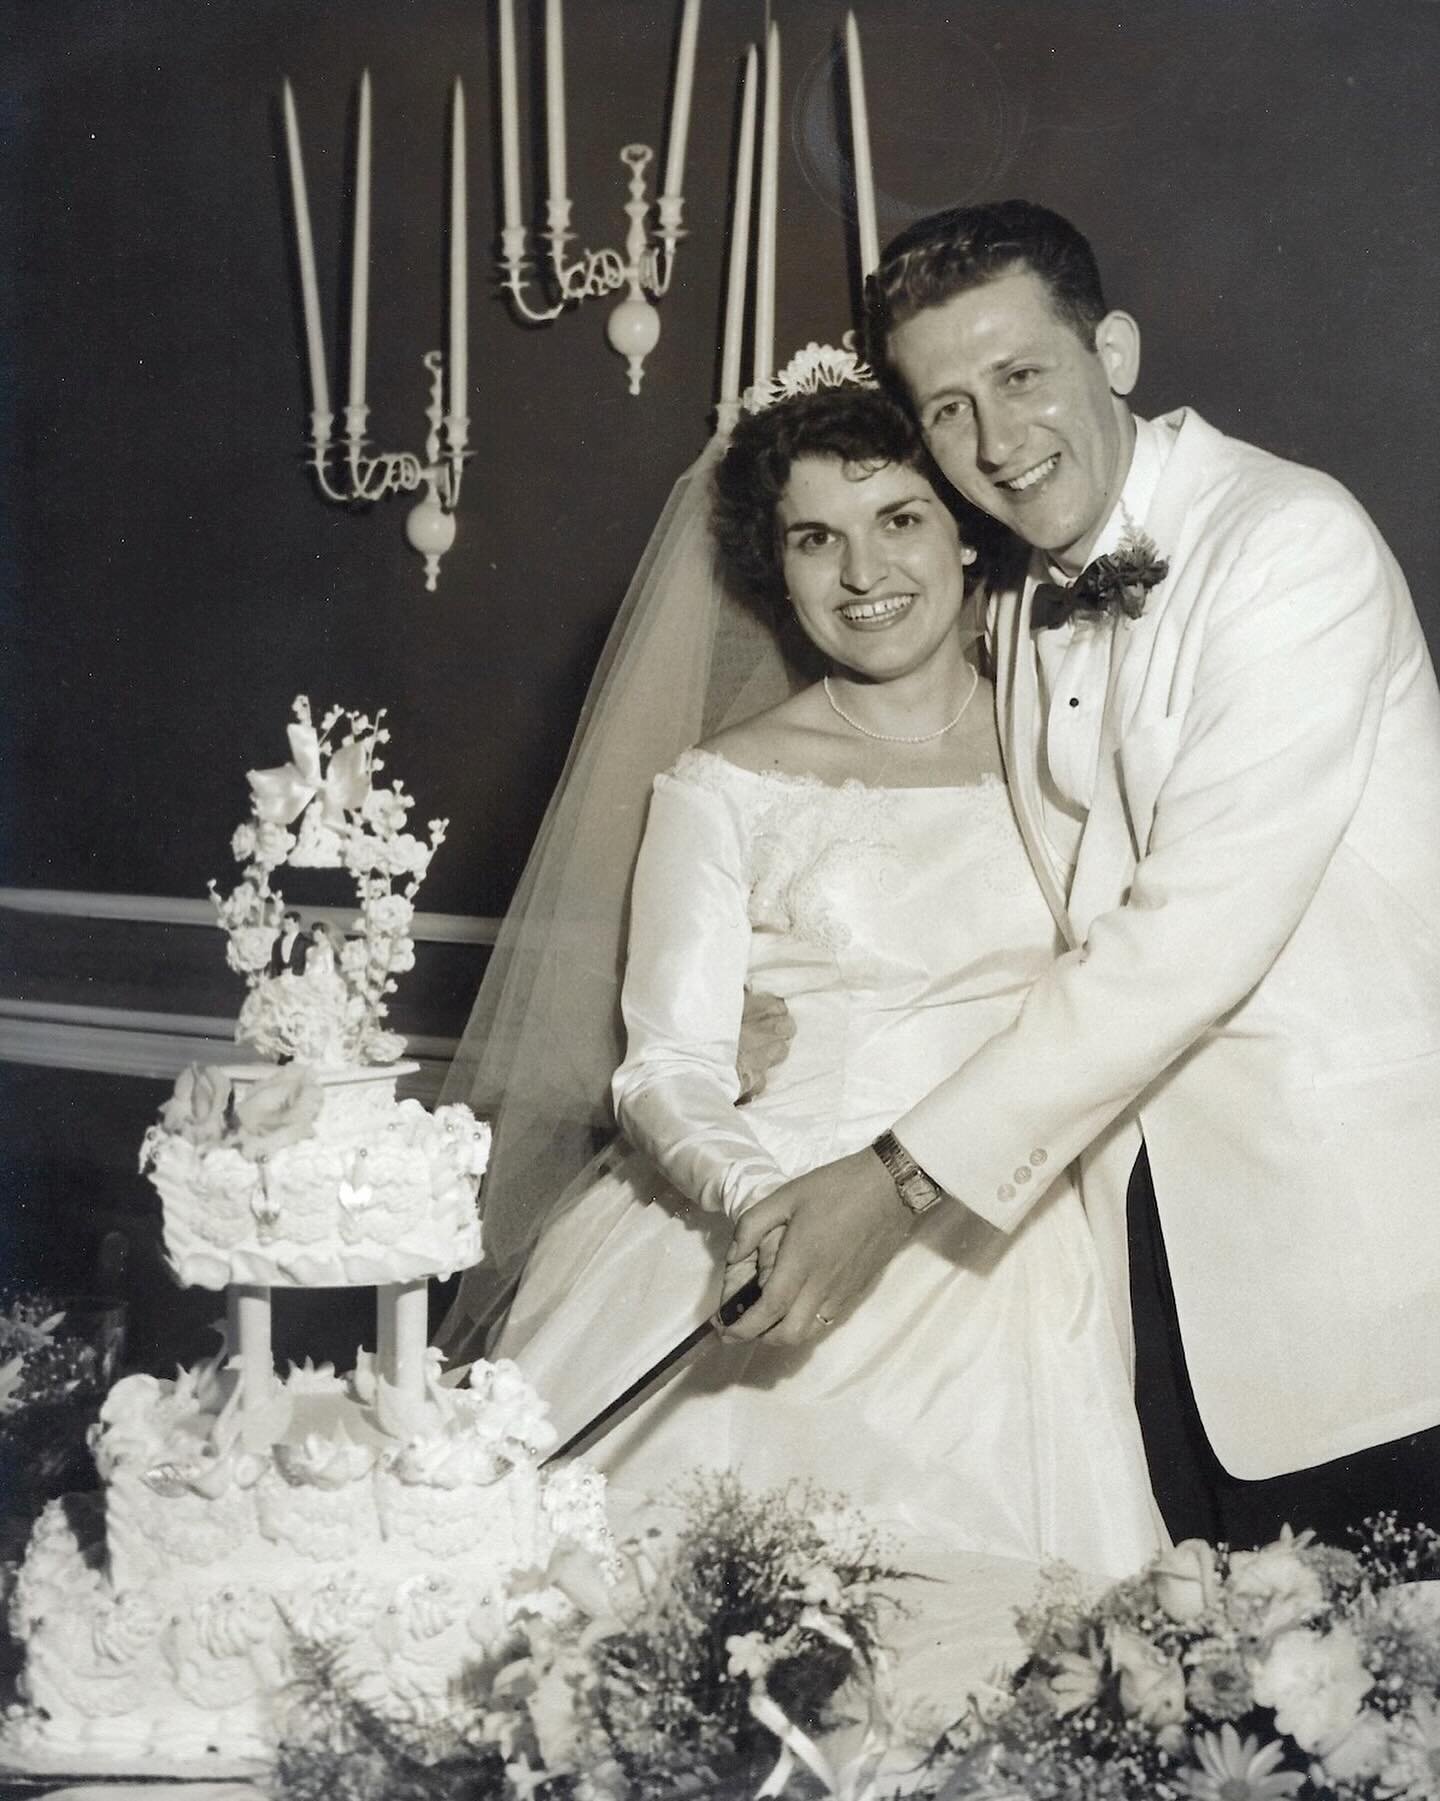 Cutting the cake is just as beautiful as it was in 1959, especially when wearing your grandmother&rsquo;s beaded wedding crown. Rebecca&rsquo;s journey to restore this family heirloom is all on today&rsquo;s blog. Her photos are magnificent with the 